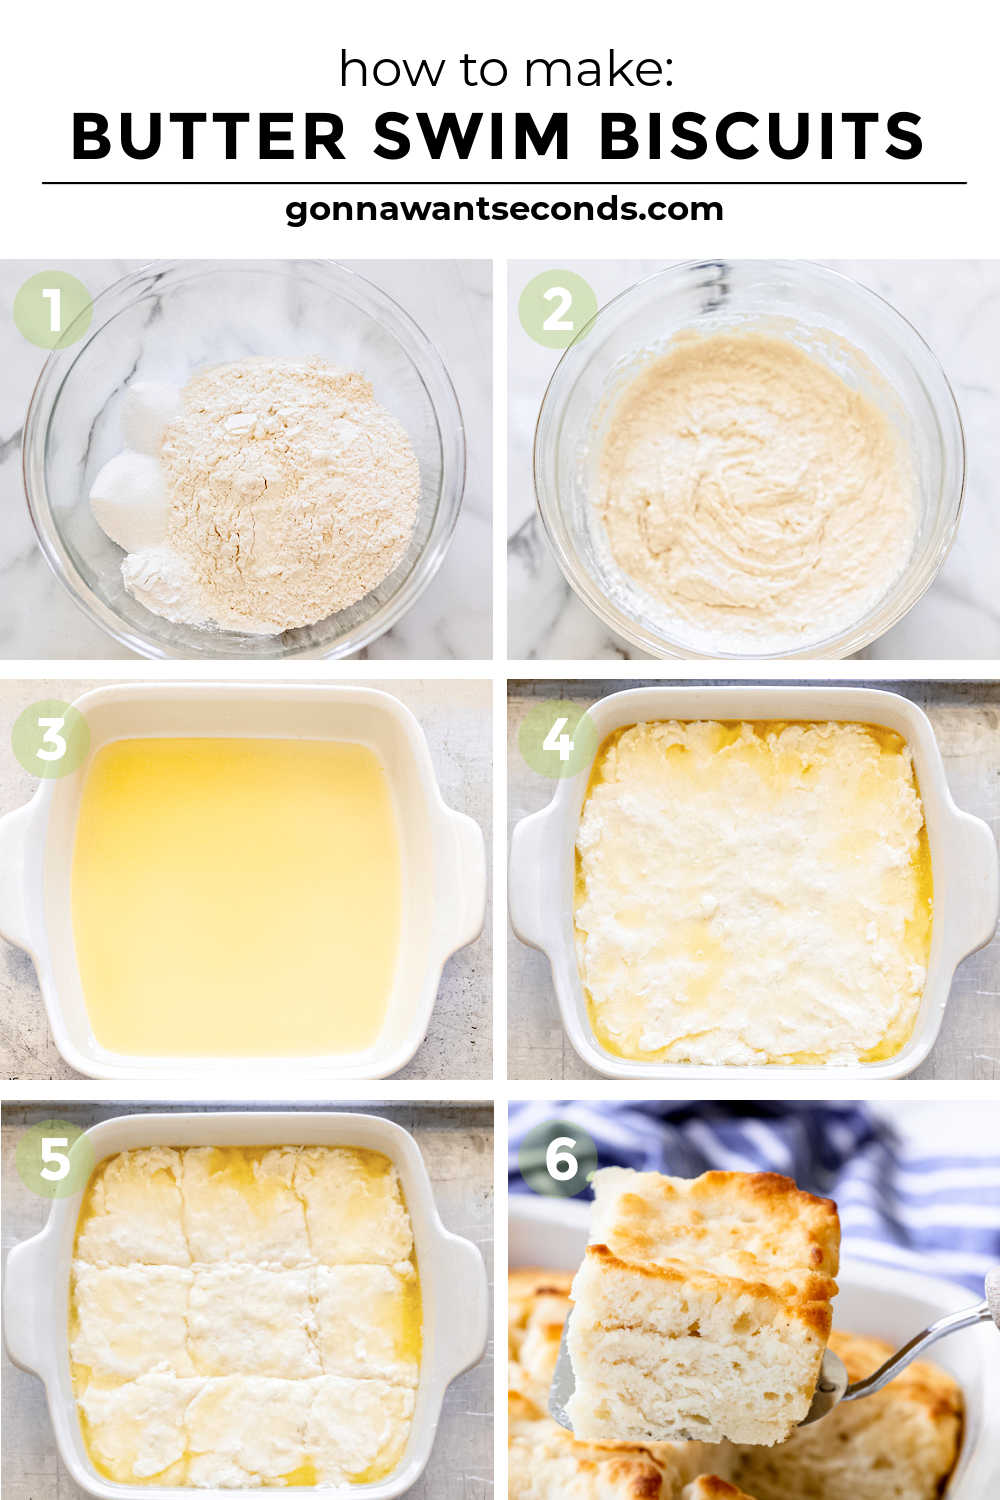 Step by step how to make butter swim biscuits